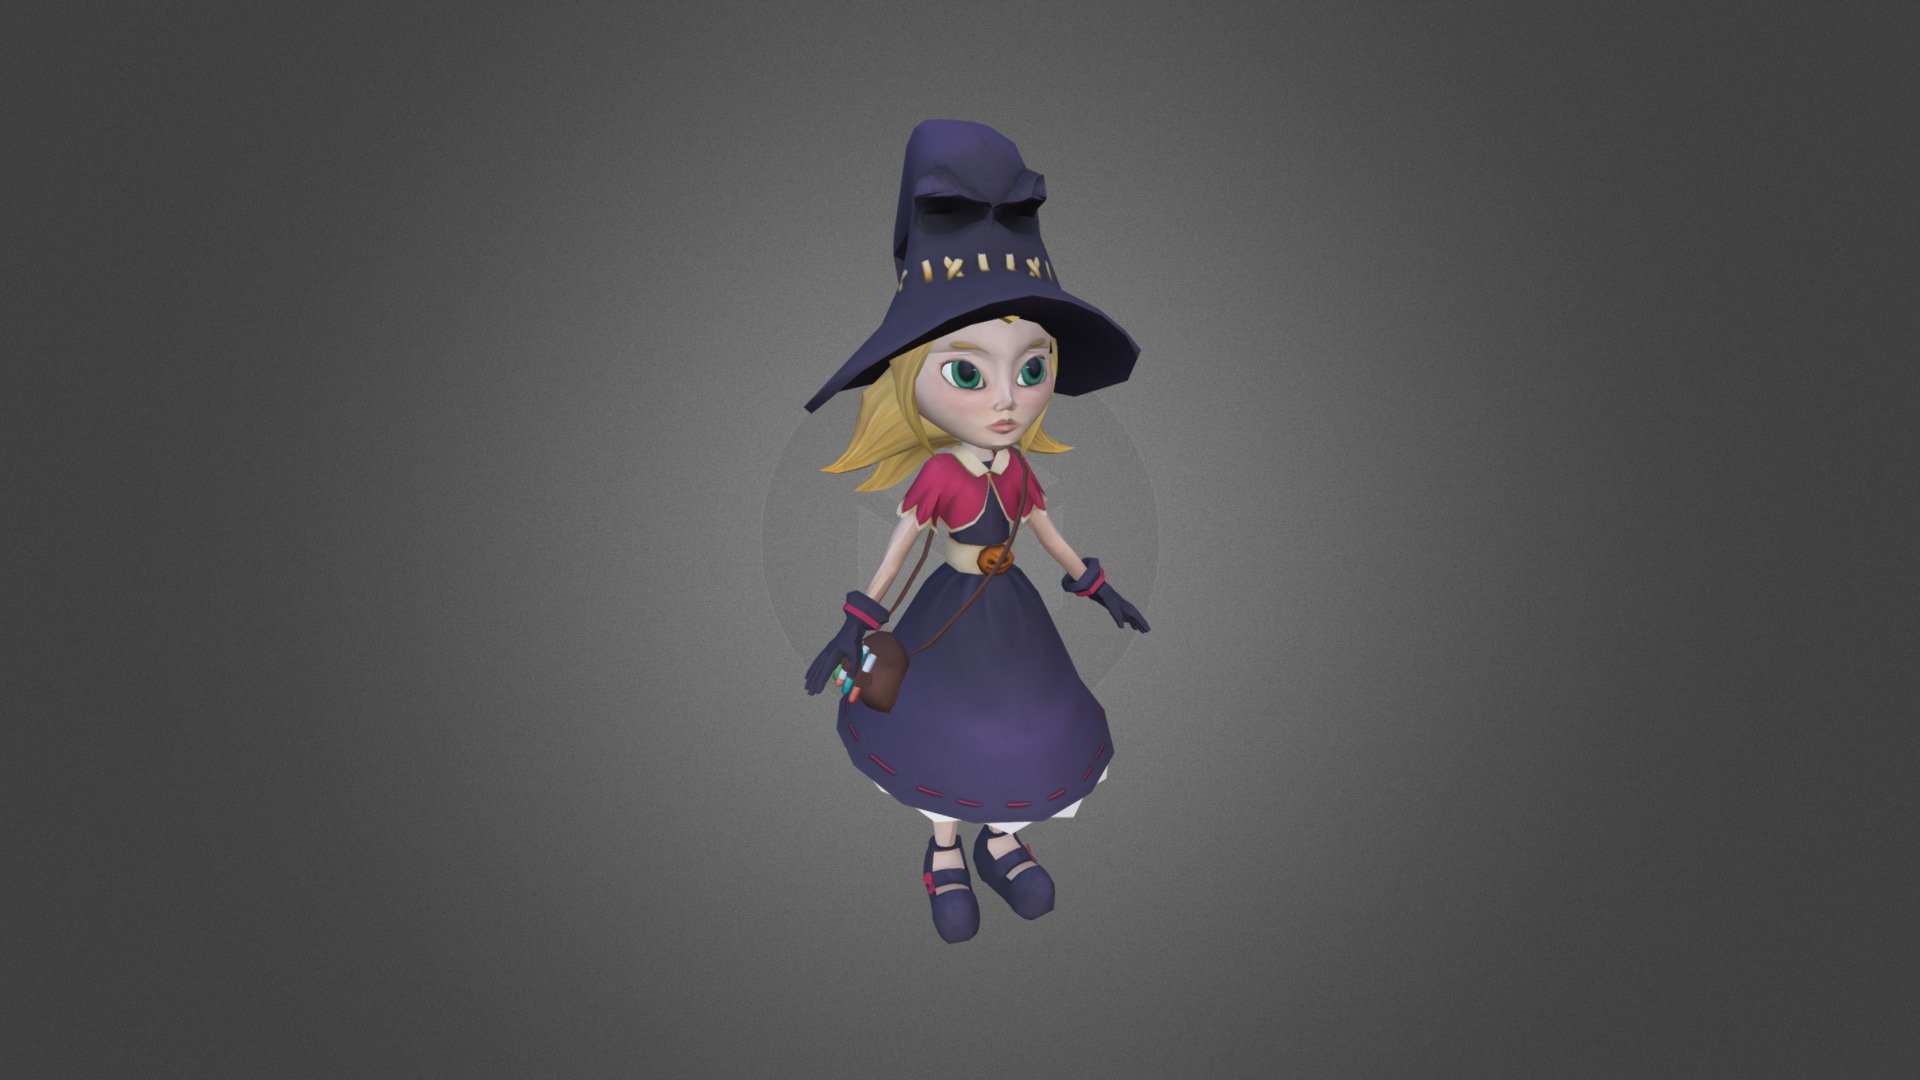 made with 3Ds max and photoshop CS5 for the texture - Little witch - 3D model by lucile.lacoste 3d model